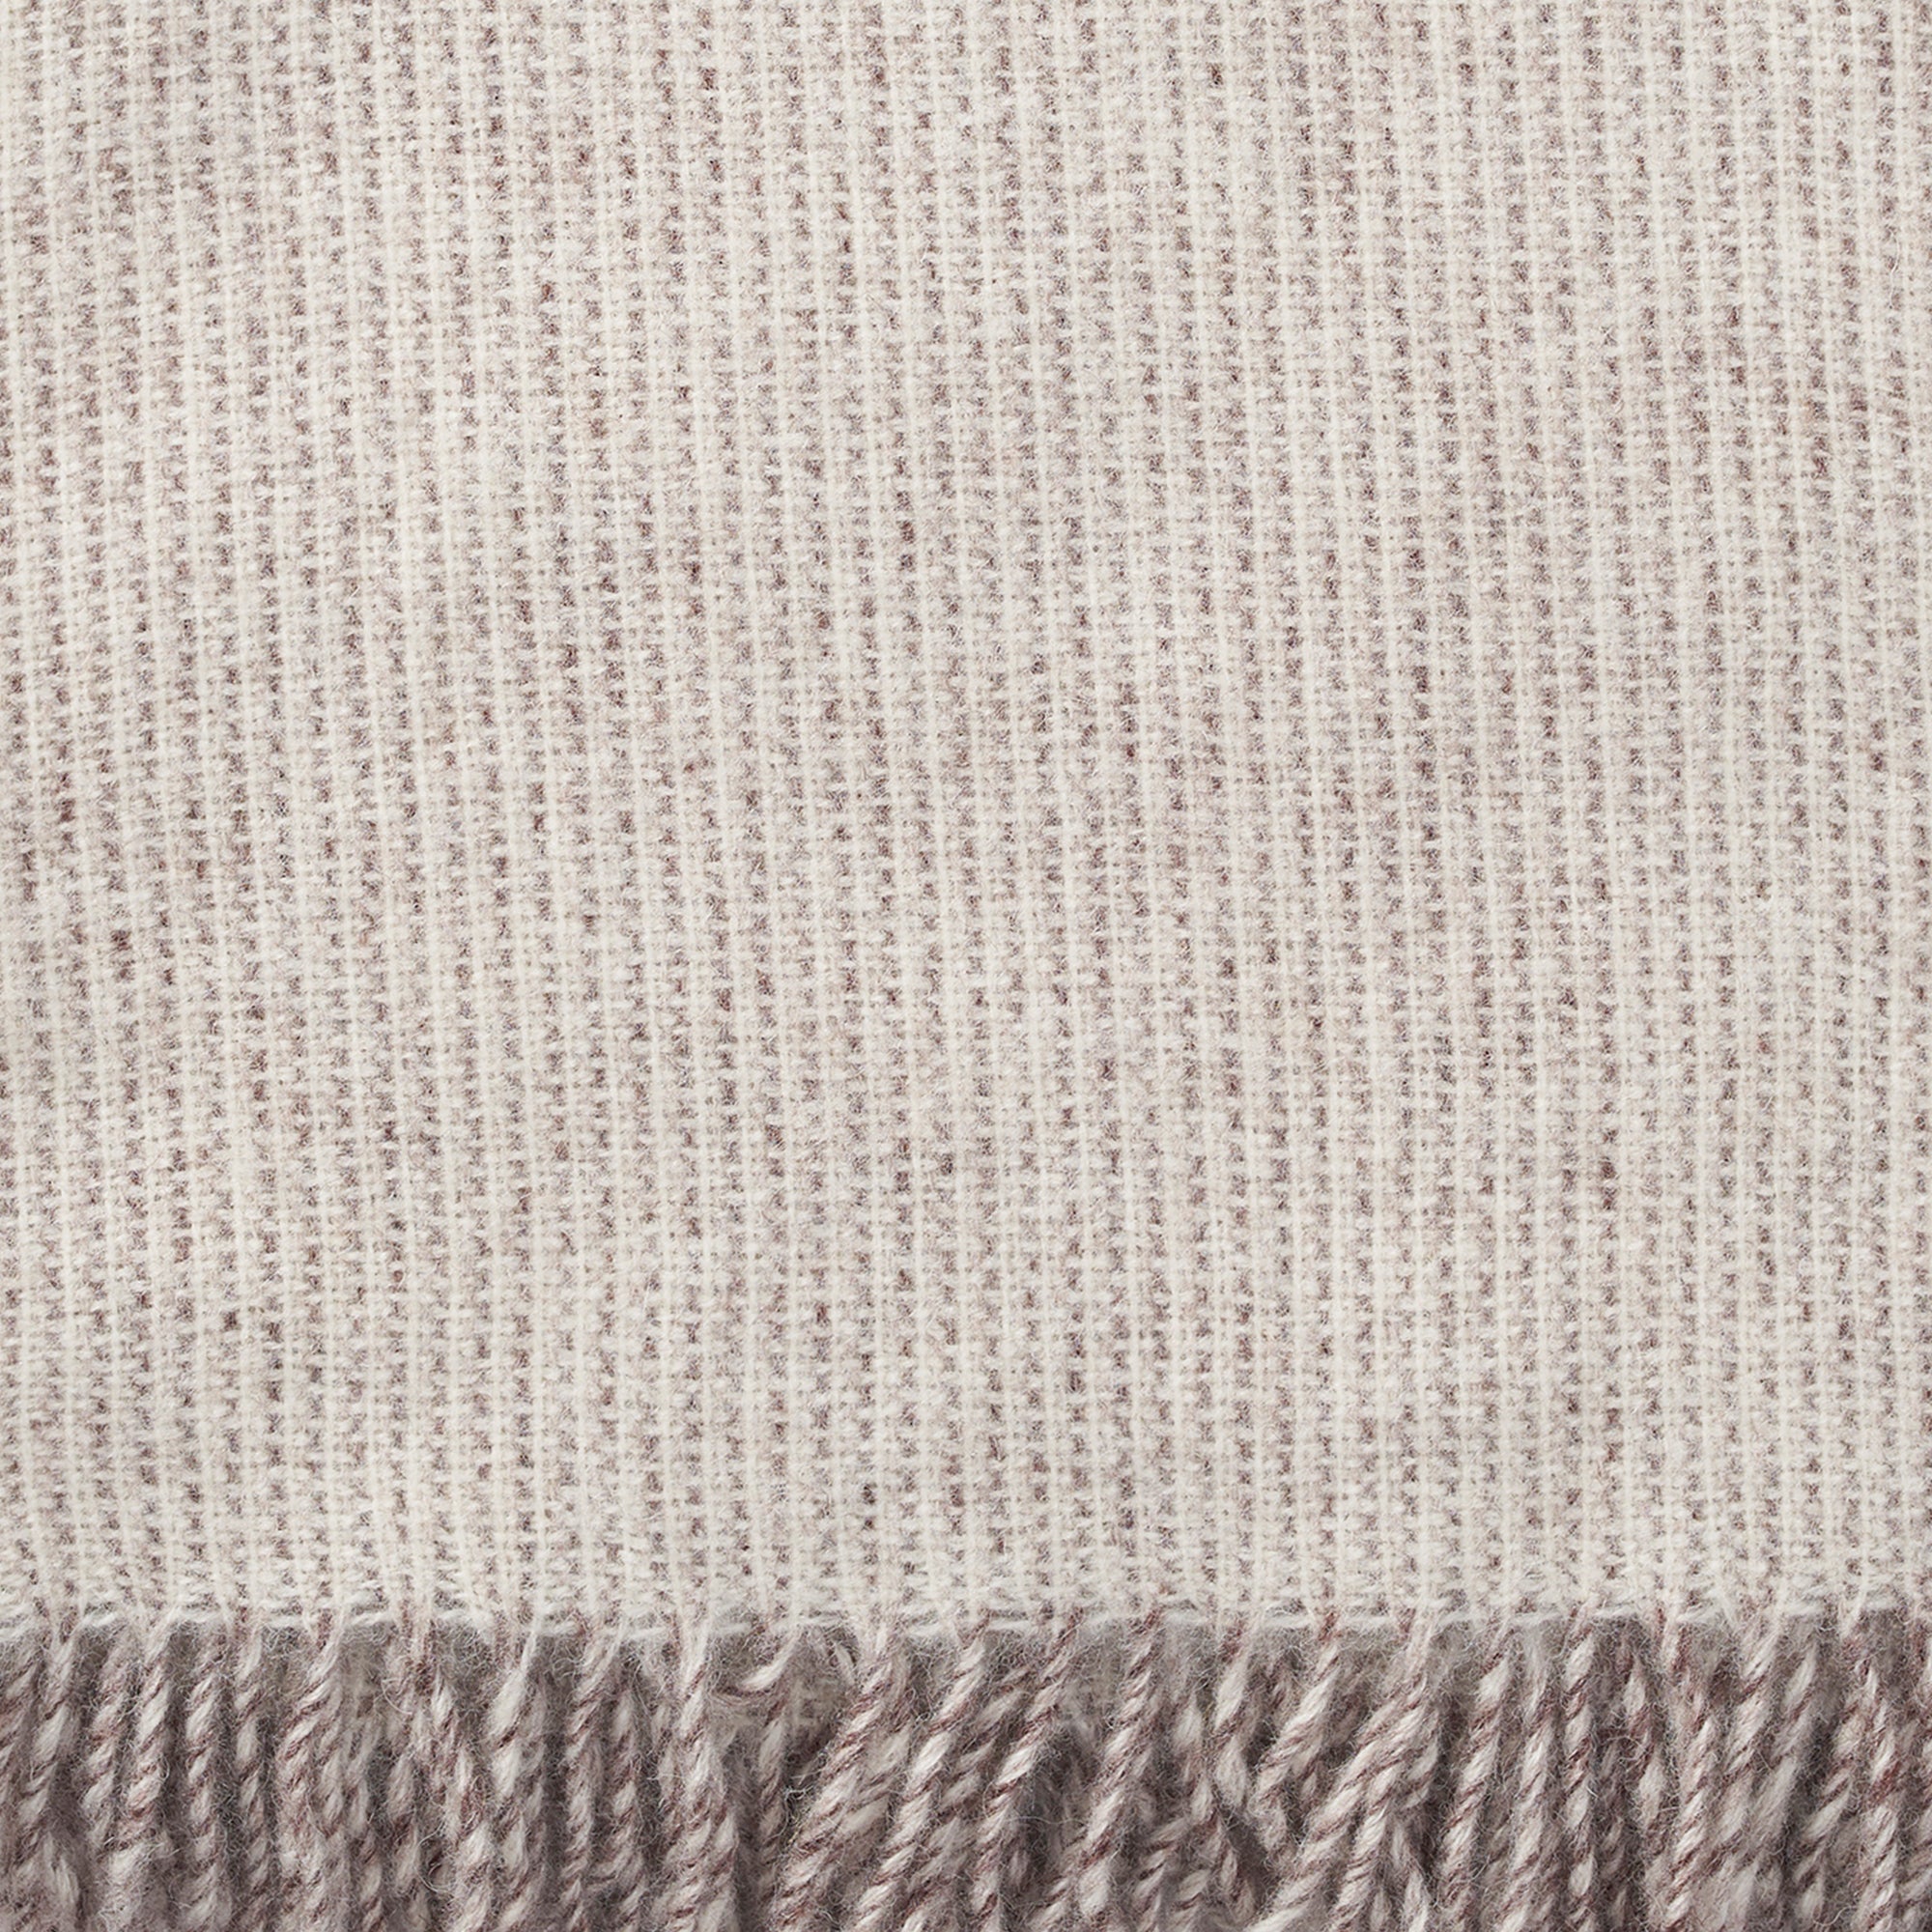 Shimmer Natural 130x200cm Brushed Lambswool Throw